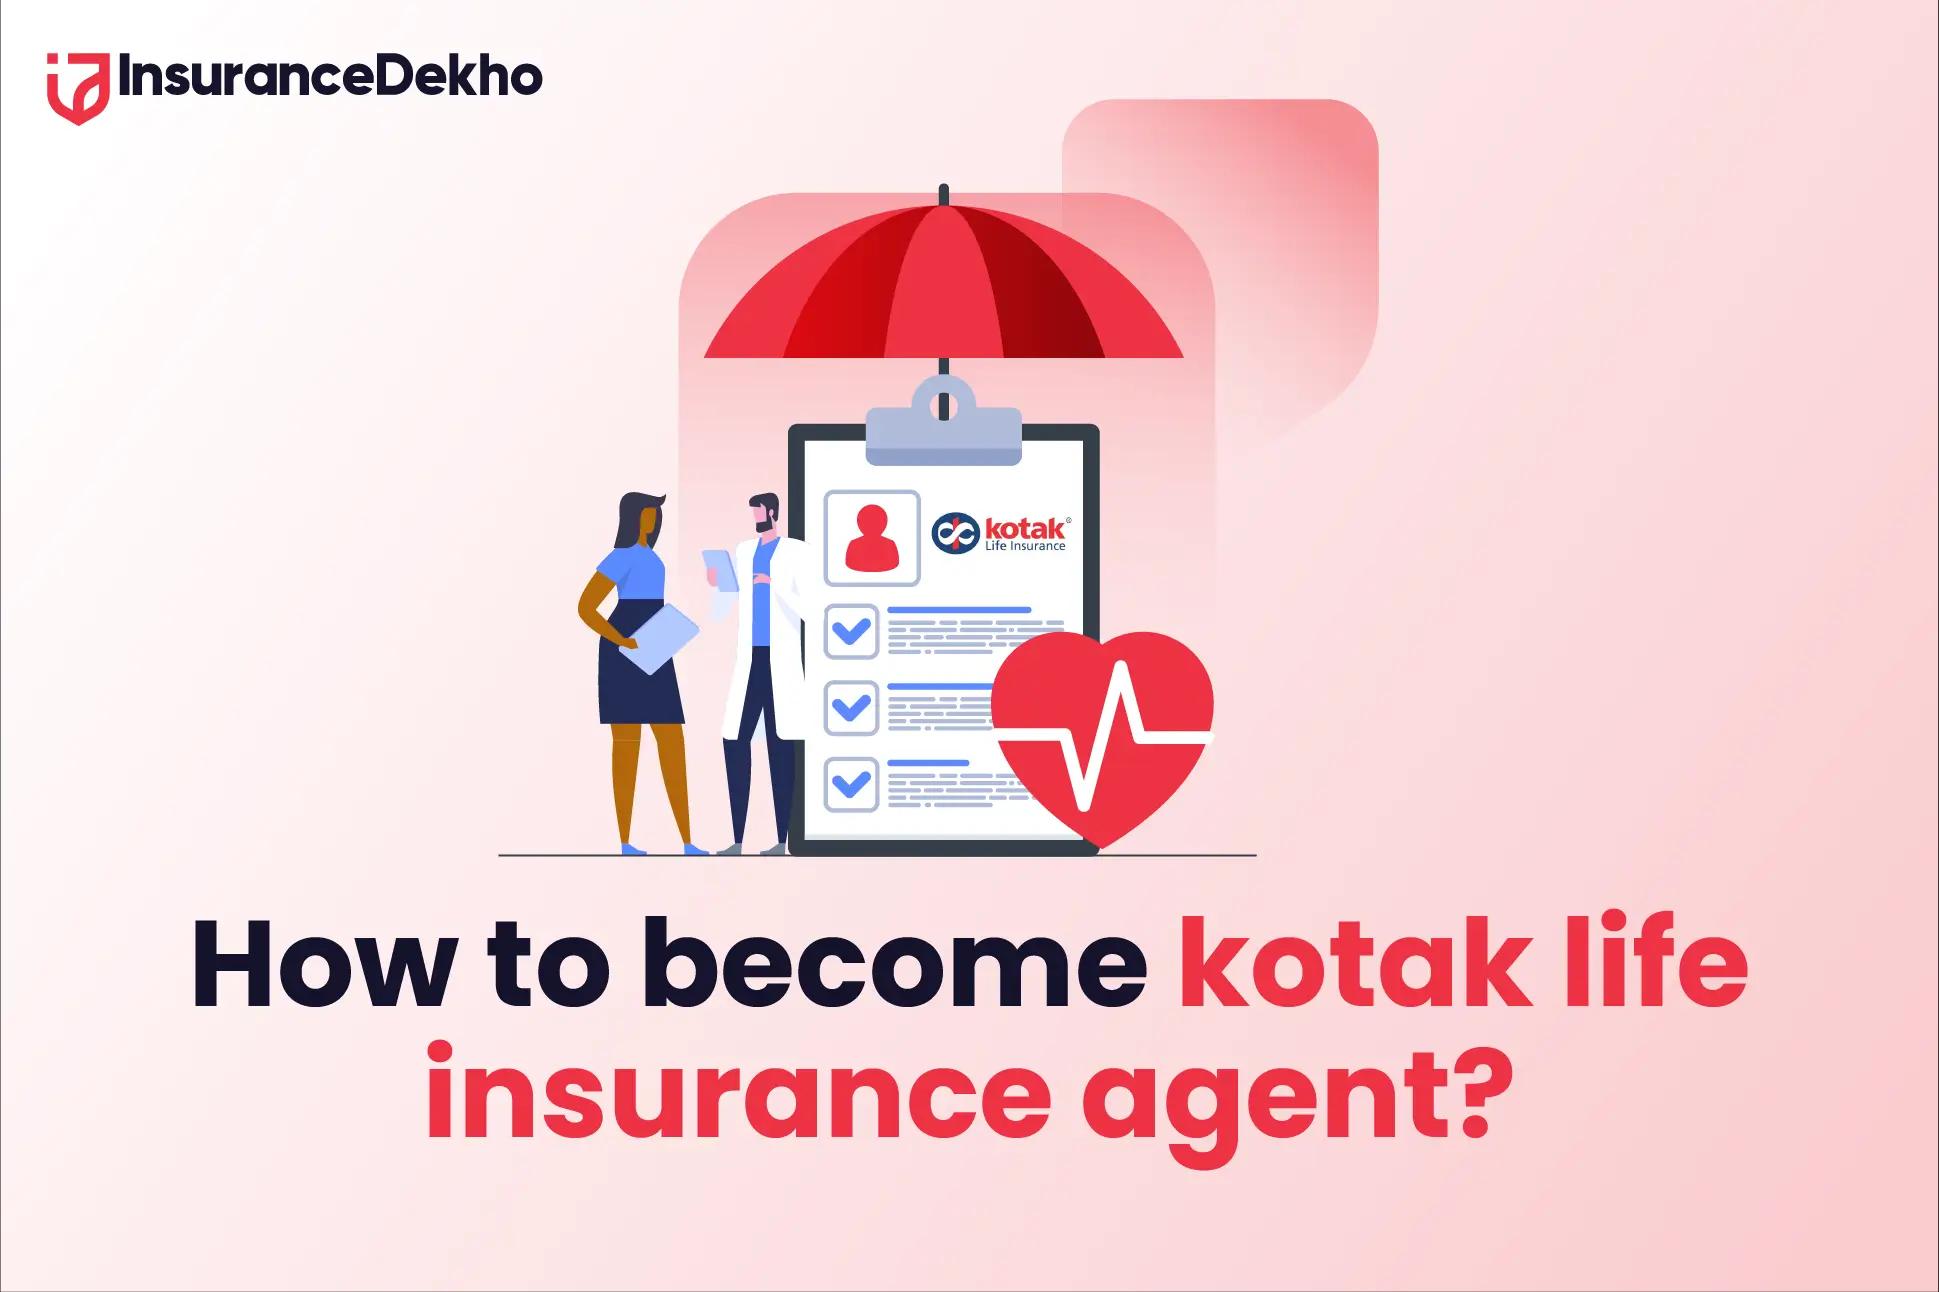 How to Become a Kotak Life Insurance Agent?